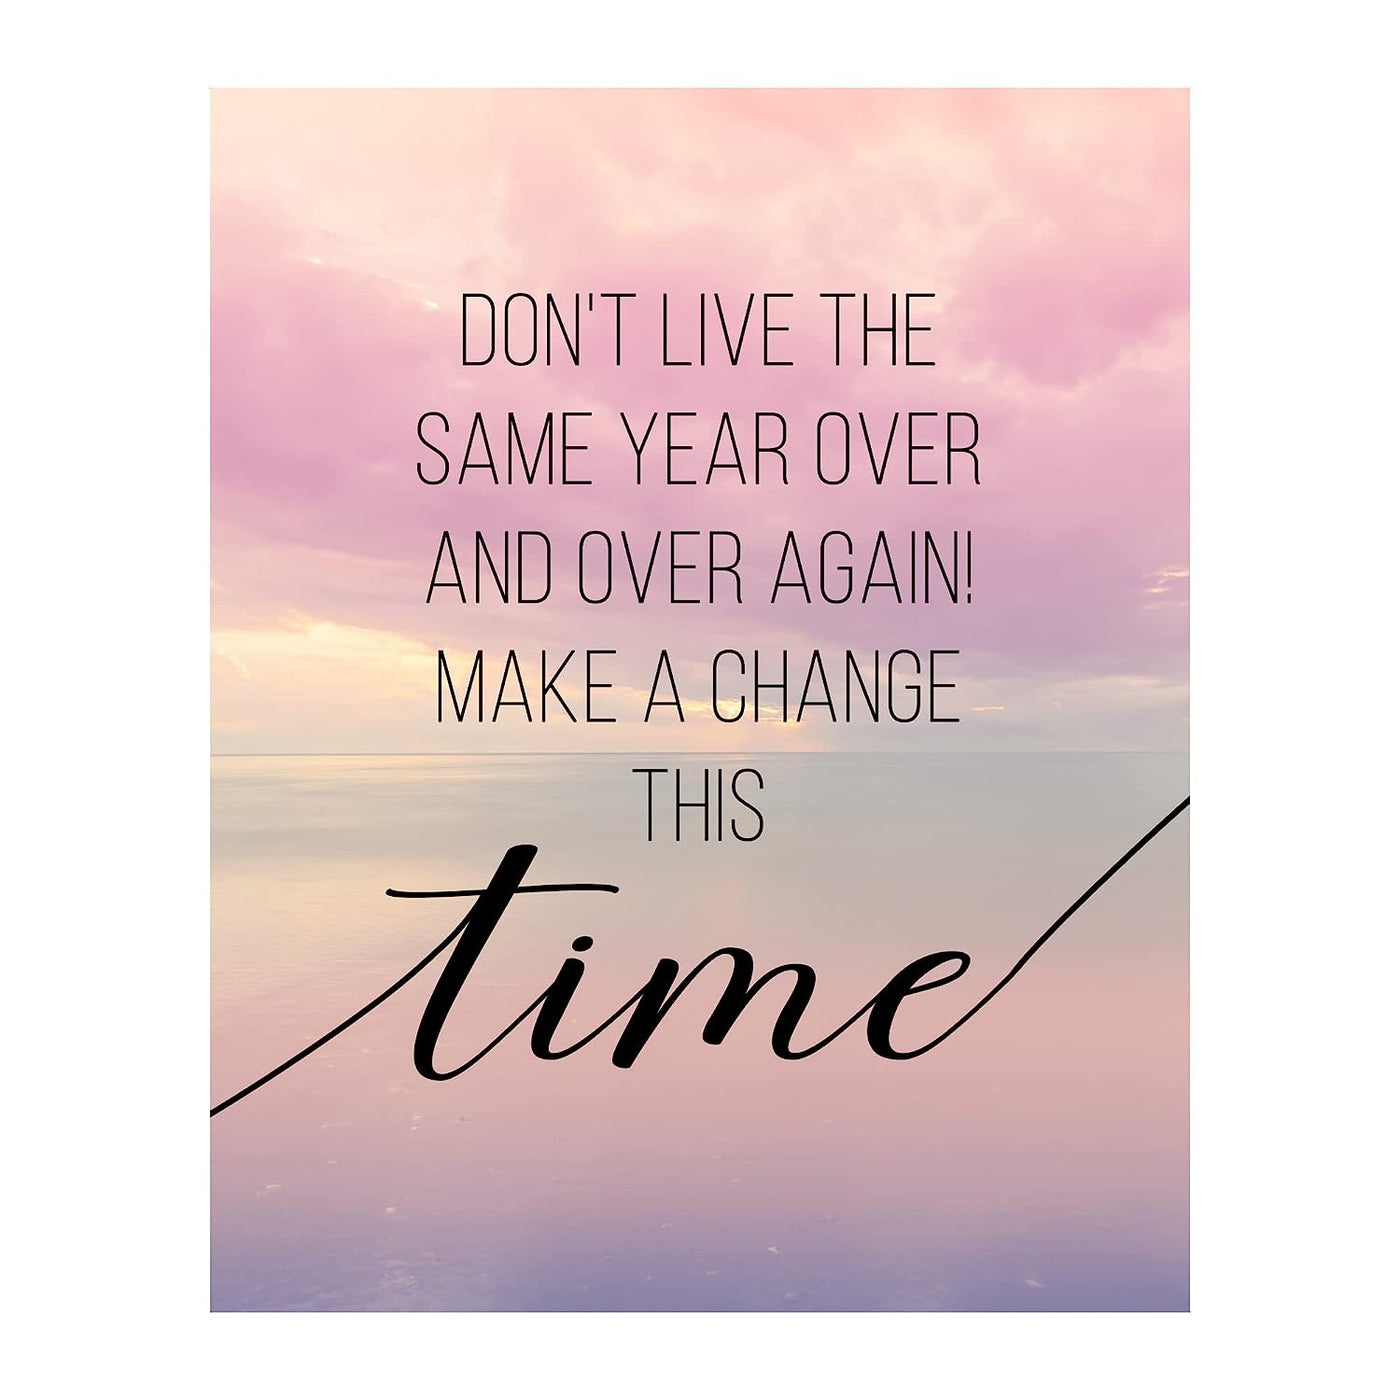 Don't Live Same Year Over-Make A Change Inspirational Quotes Wall Art -8 x 10" Typographic Wall Print-Ready to Frame. Motivational Decor for Home-Office-School-Dorm. Positive Gift of Inspiration!